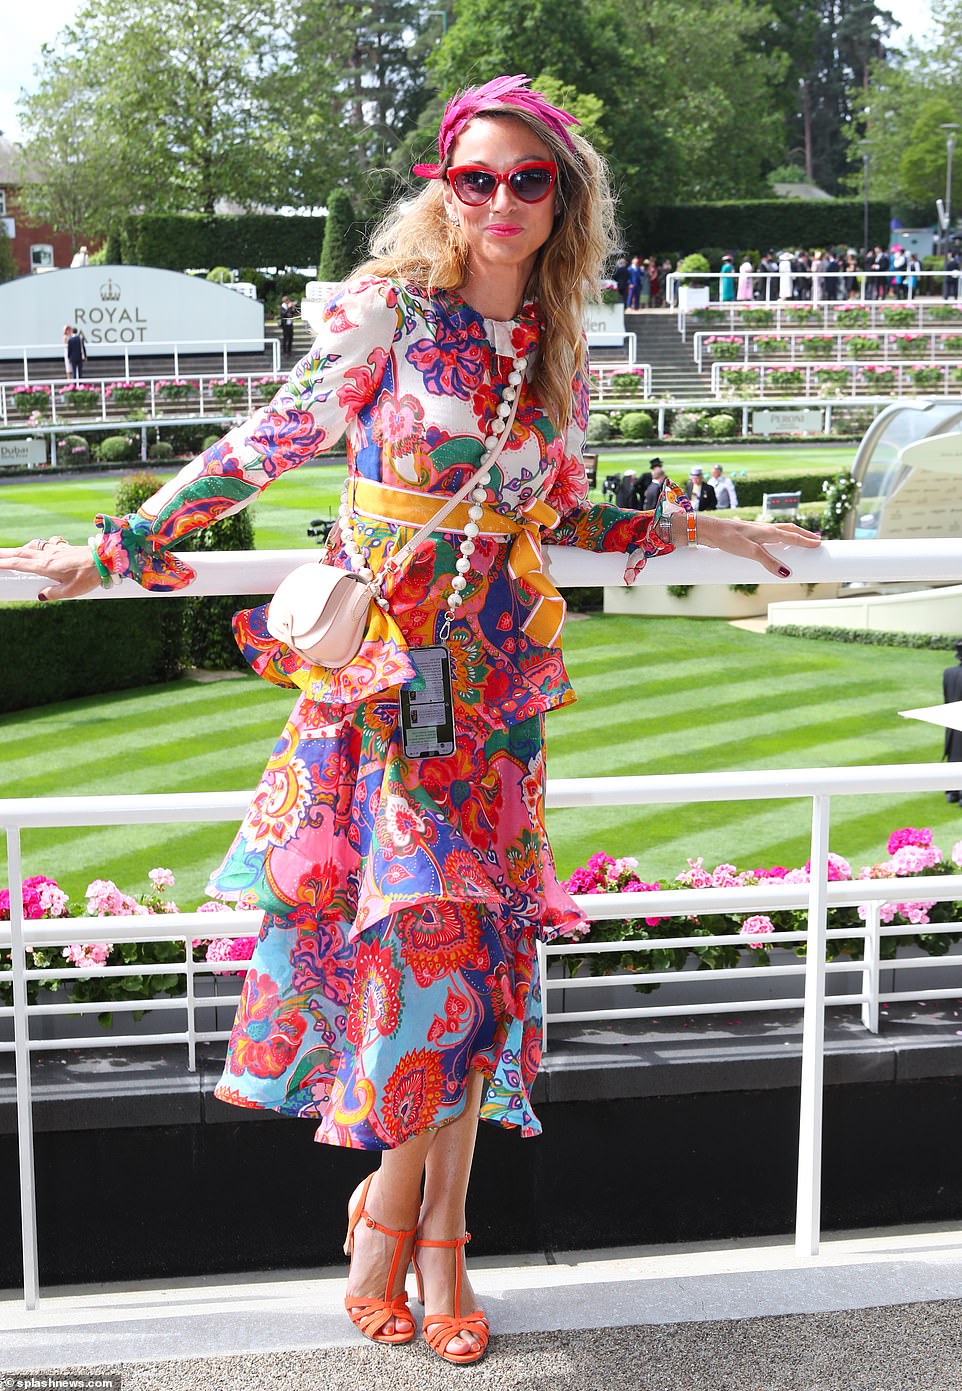 Colour splash! In contrast with many of the guests dressed in block colours, this racegoer opted for all the colours of the rainbow with her outfit